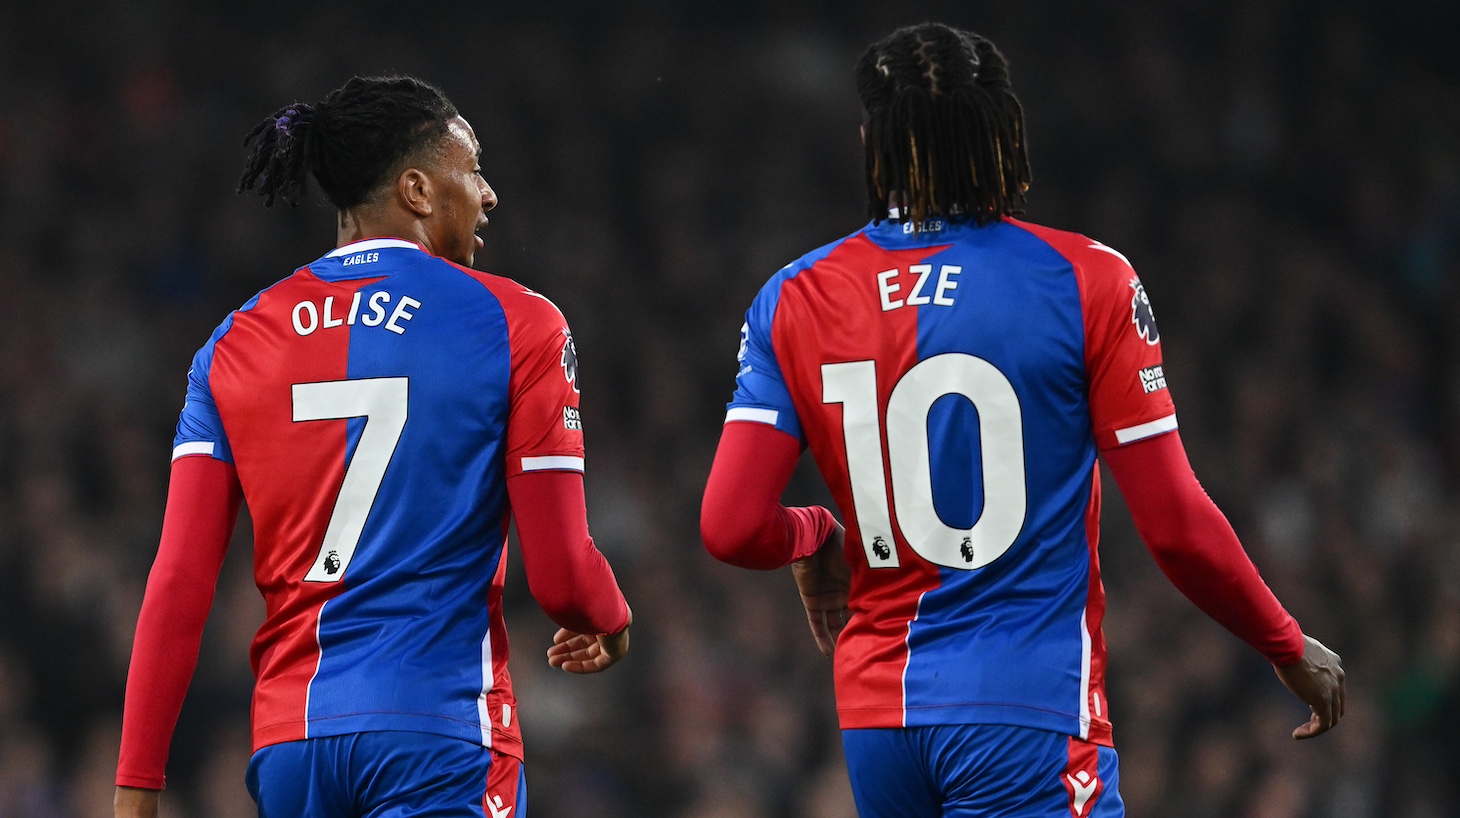 Michael Olise and Eberechi Eze of Crystal Palace during the Premier League match between Crystal Palace and Manchester United at Selhurst Park on May 6, 2024 in London, United Kingdom.